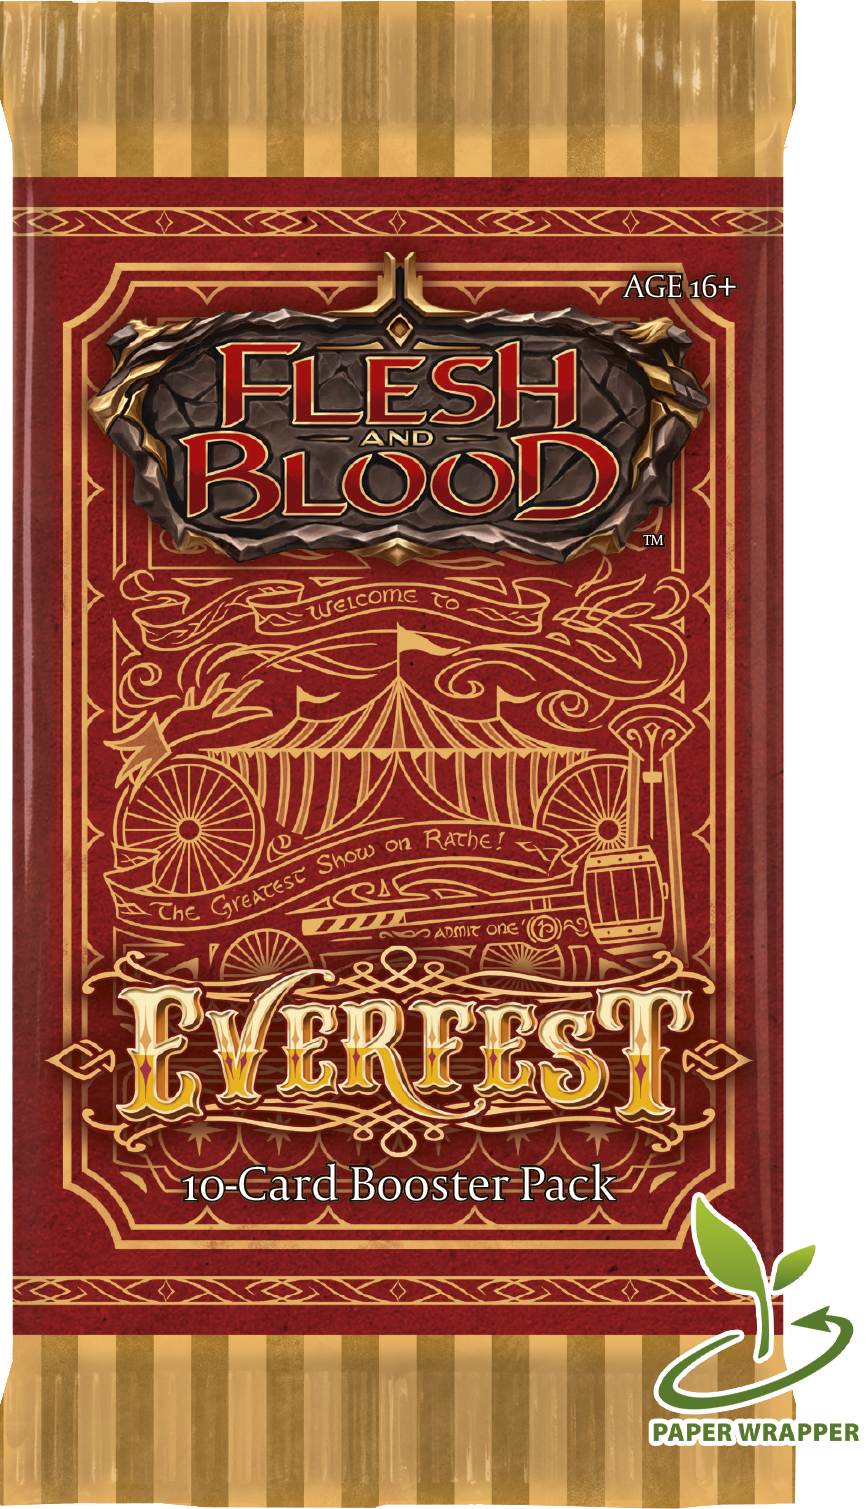 Flesh and Blood TCG - Everfest First Edition Booster Pack